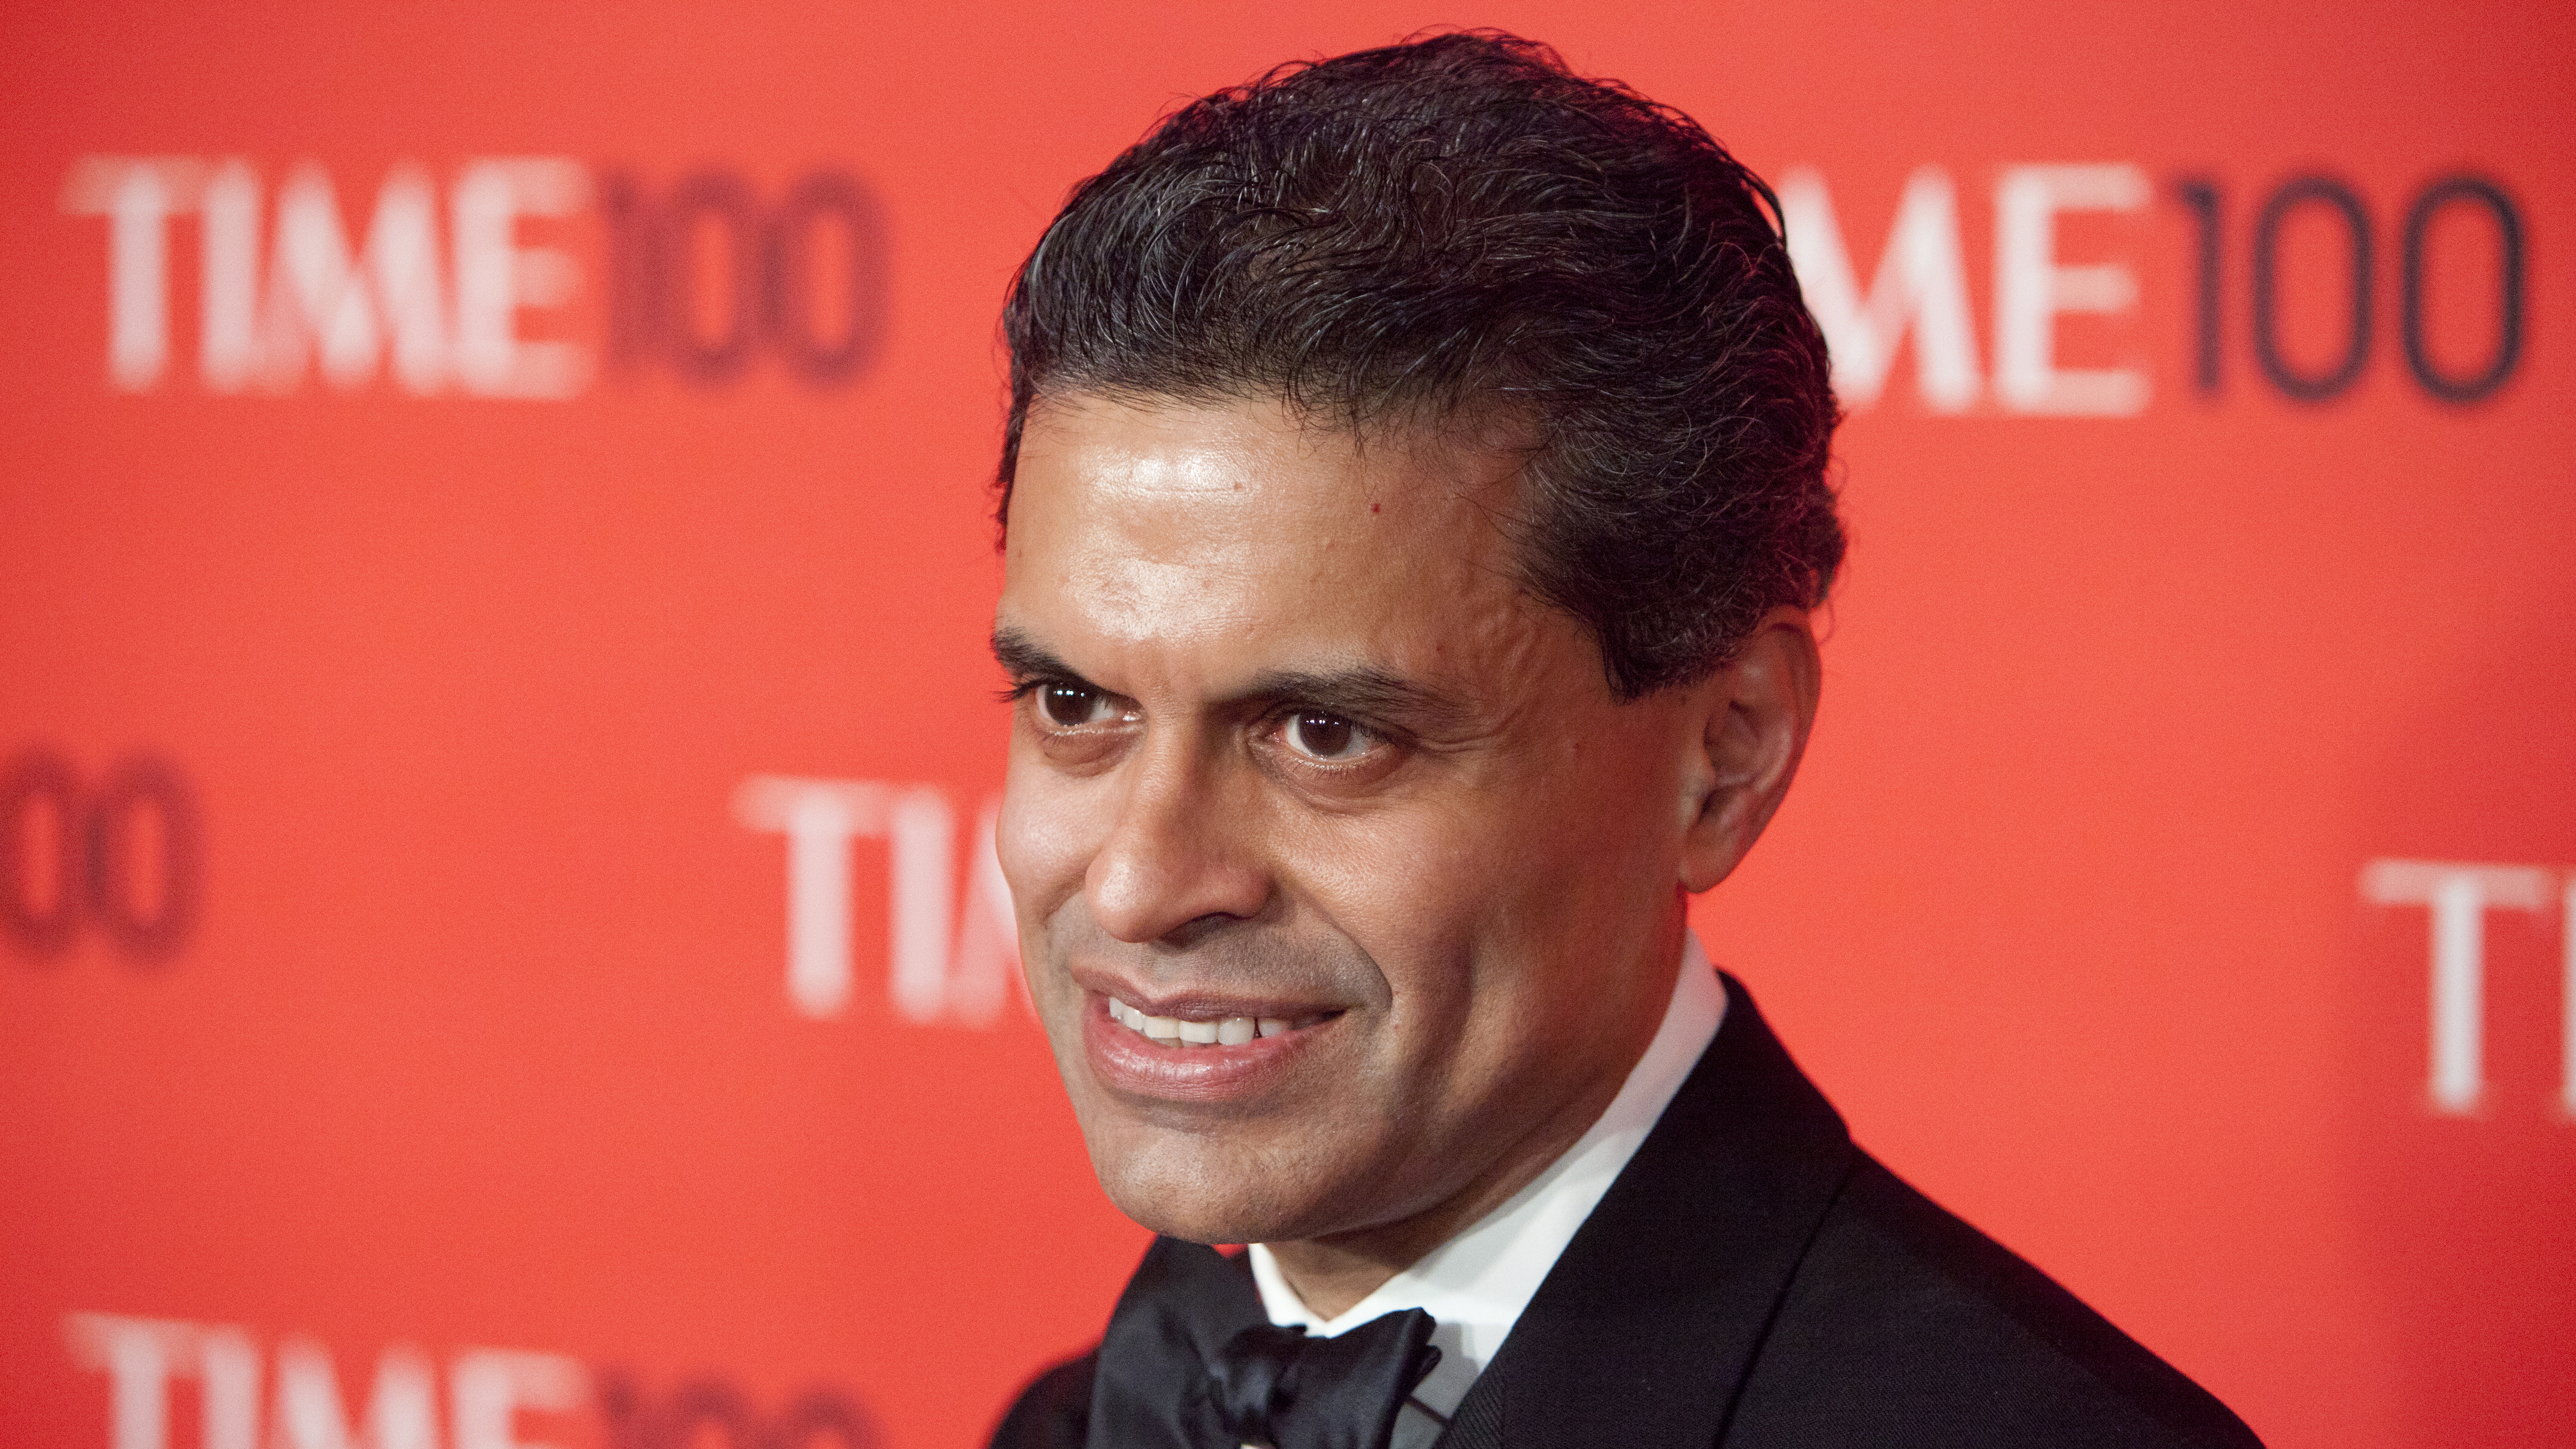 Fareed Zakaria urges Biden to adopt Trump’s immigration policies, stating it’s the right move